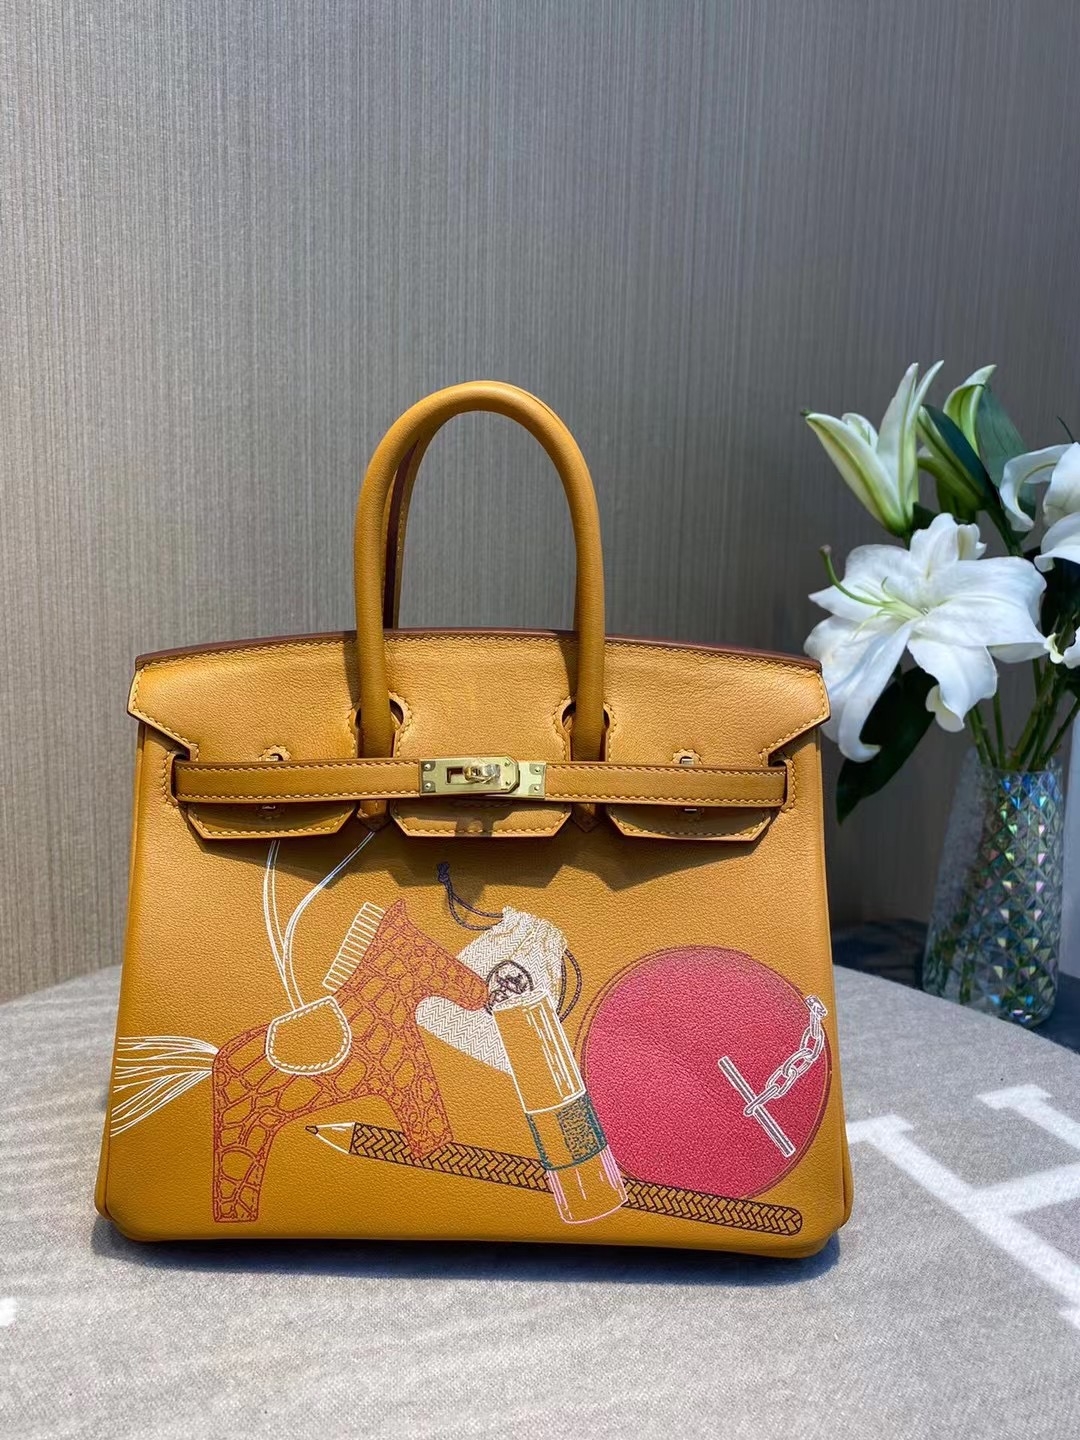 Tuia Hermes Birkin In And Out  